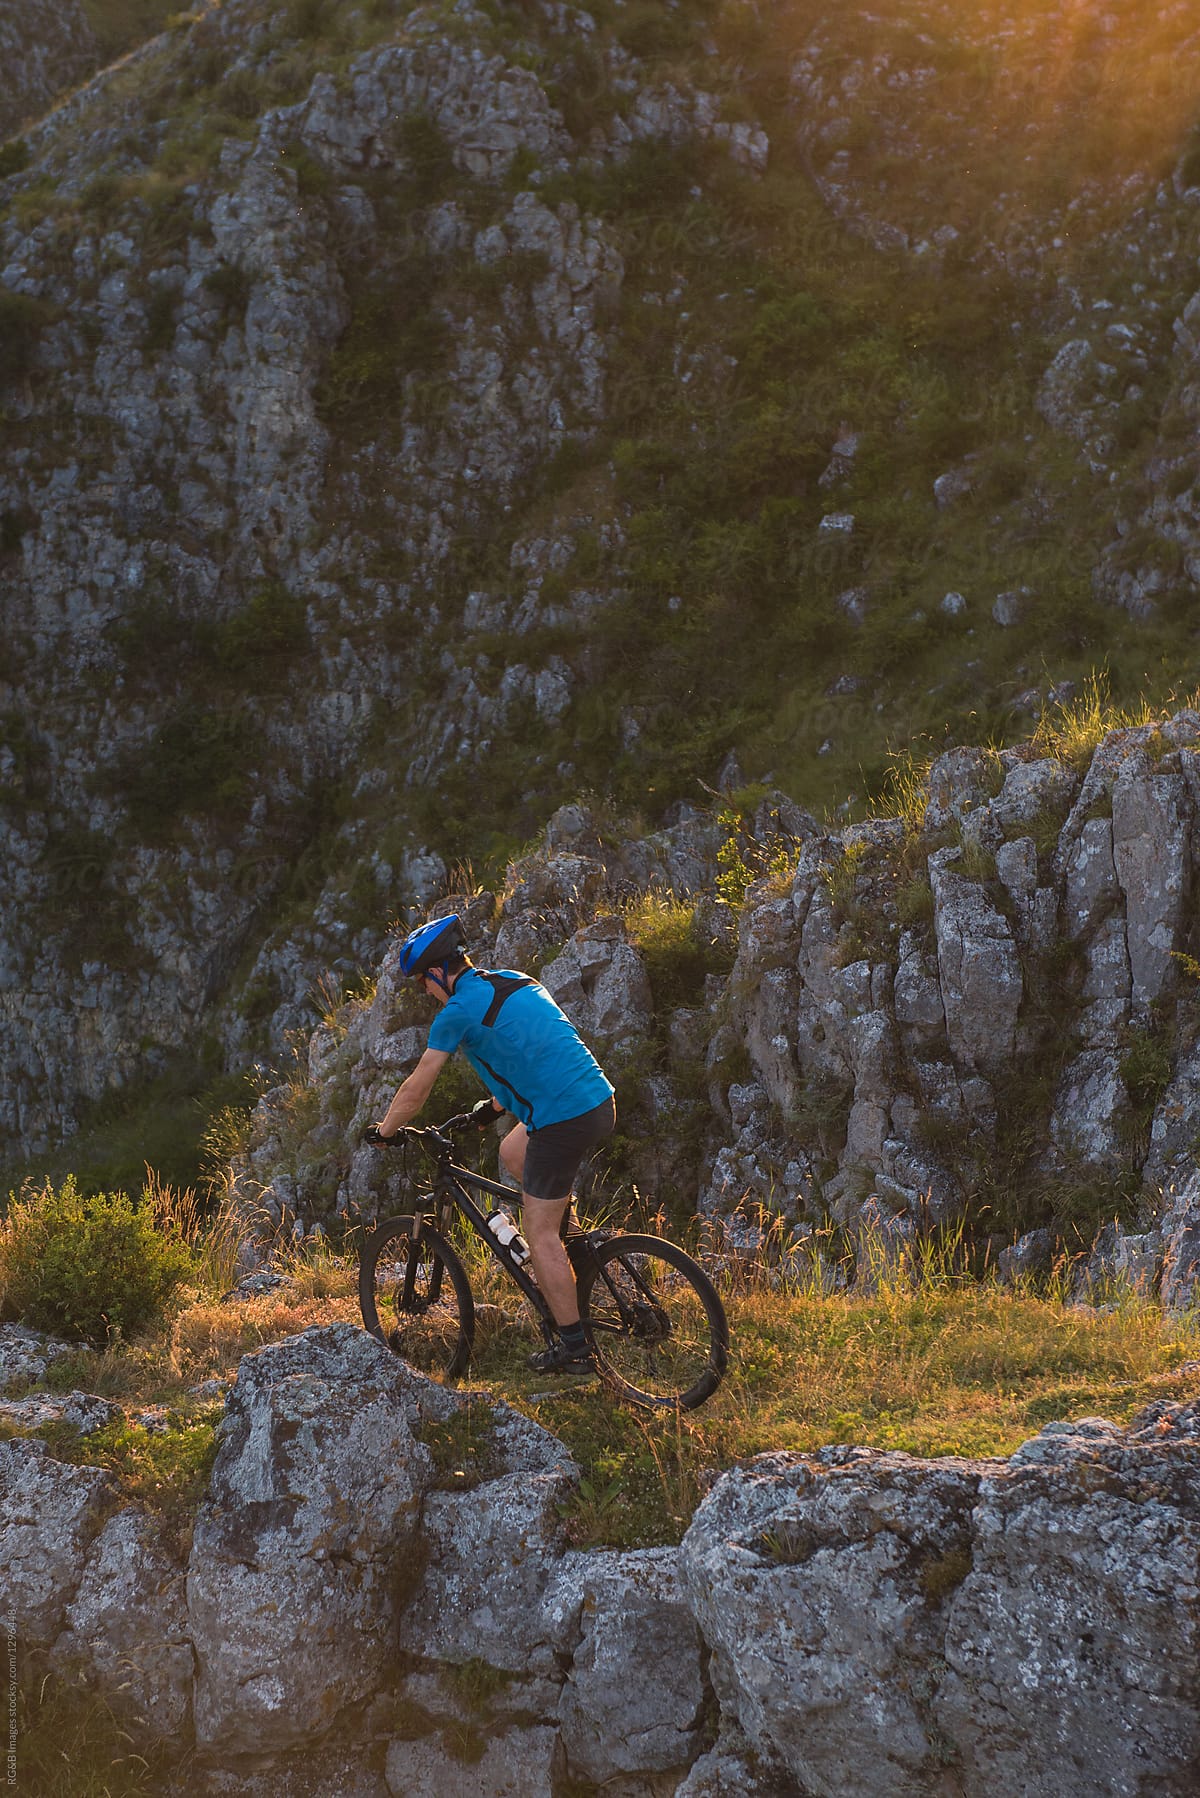 Man riding mtb off road in nature during sunset